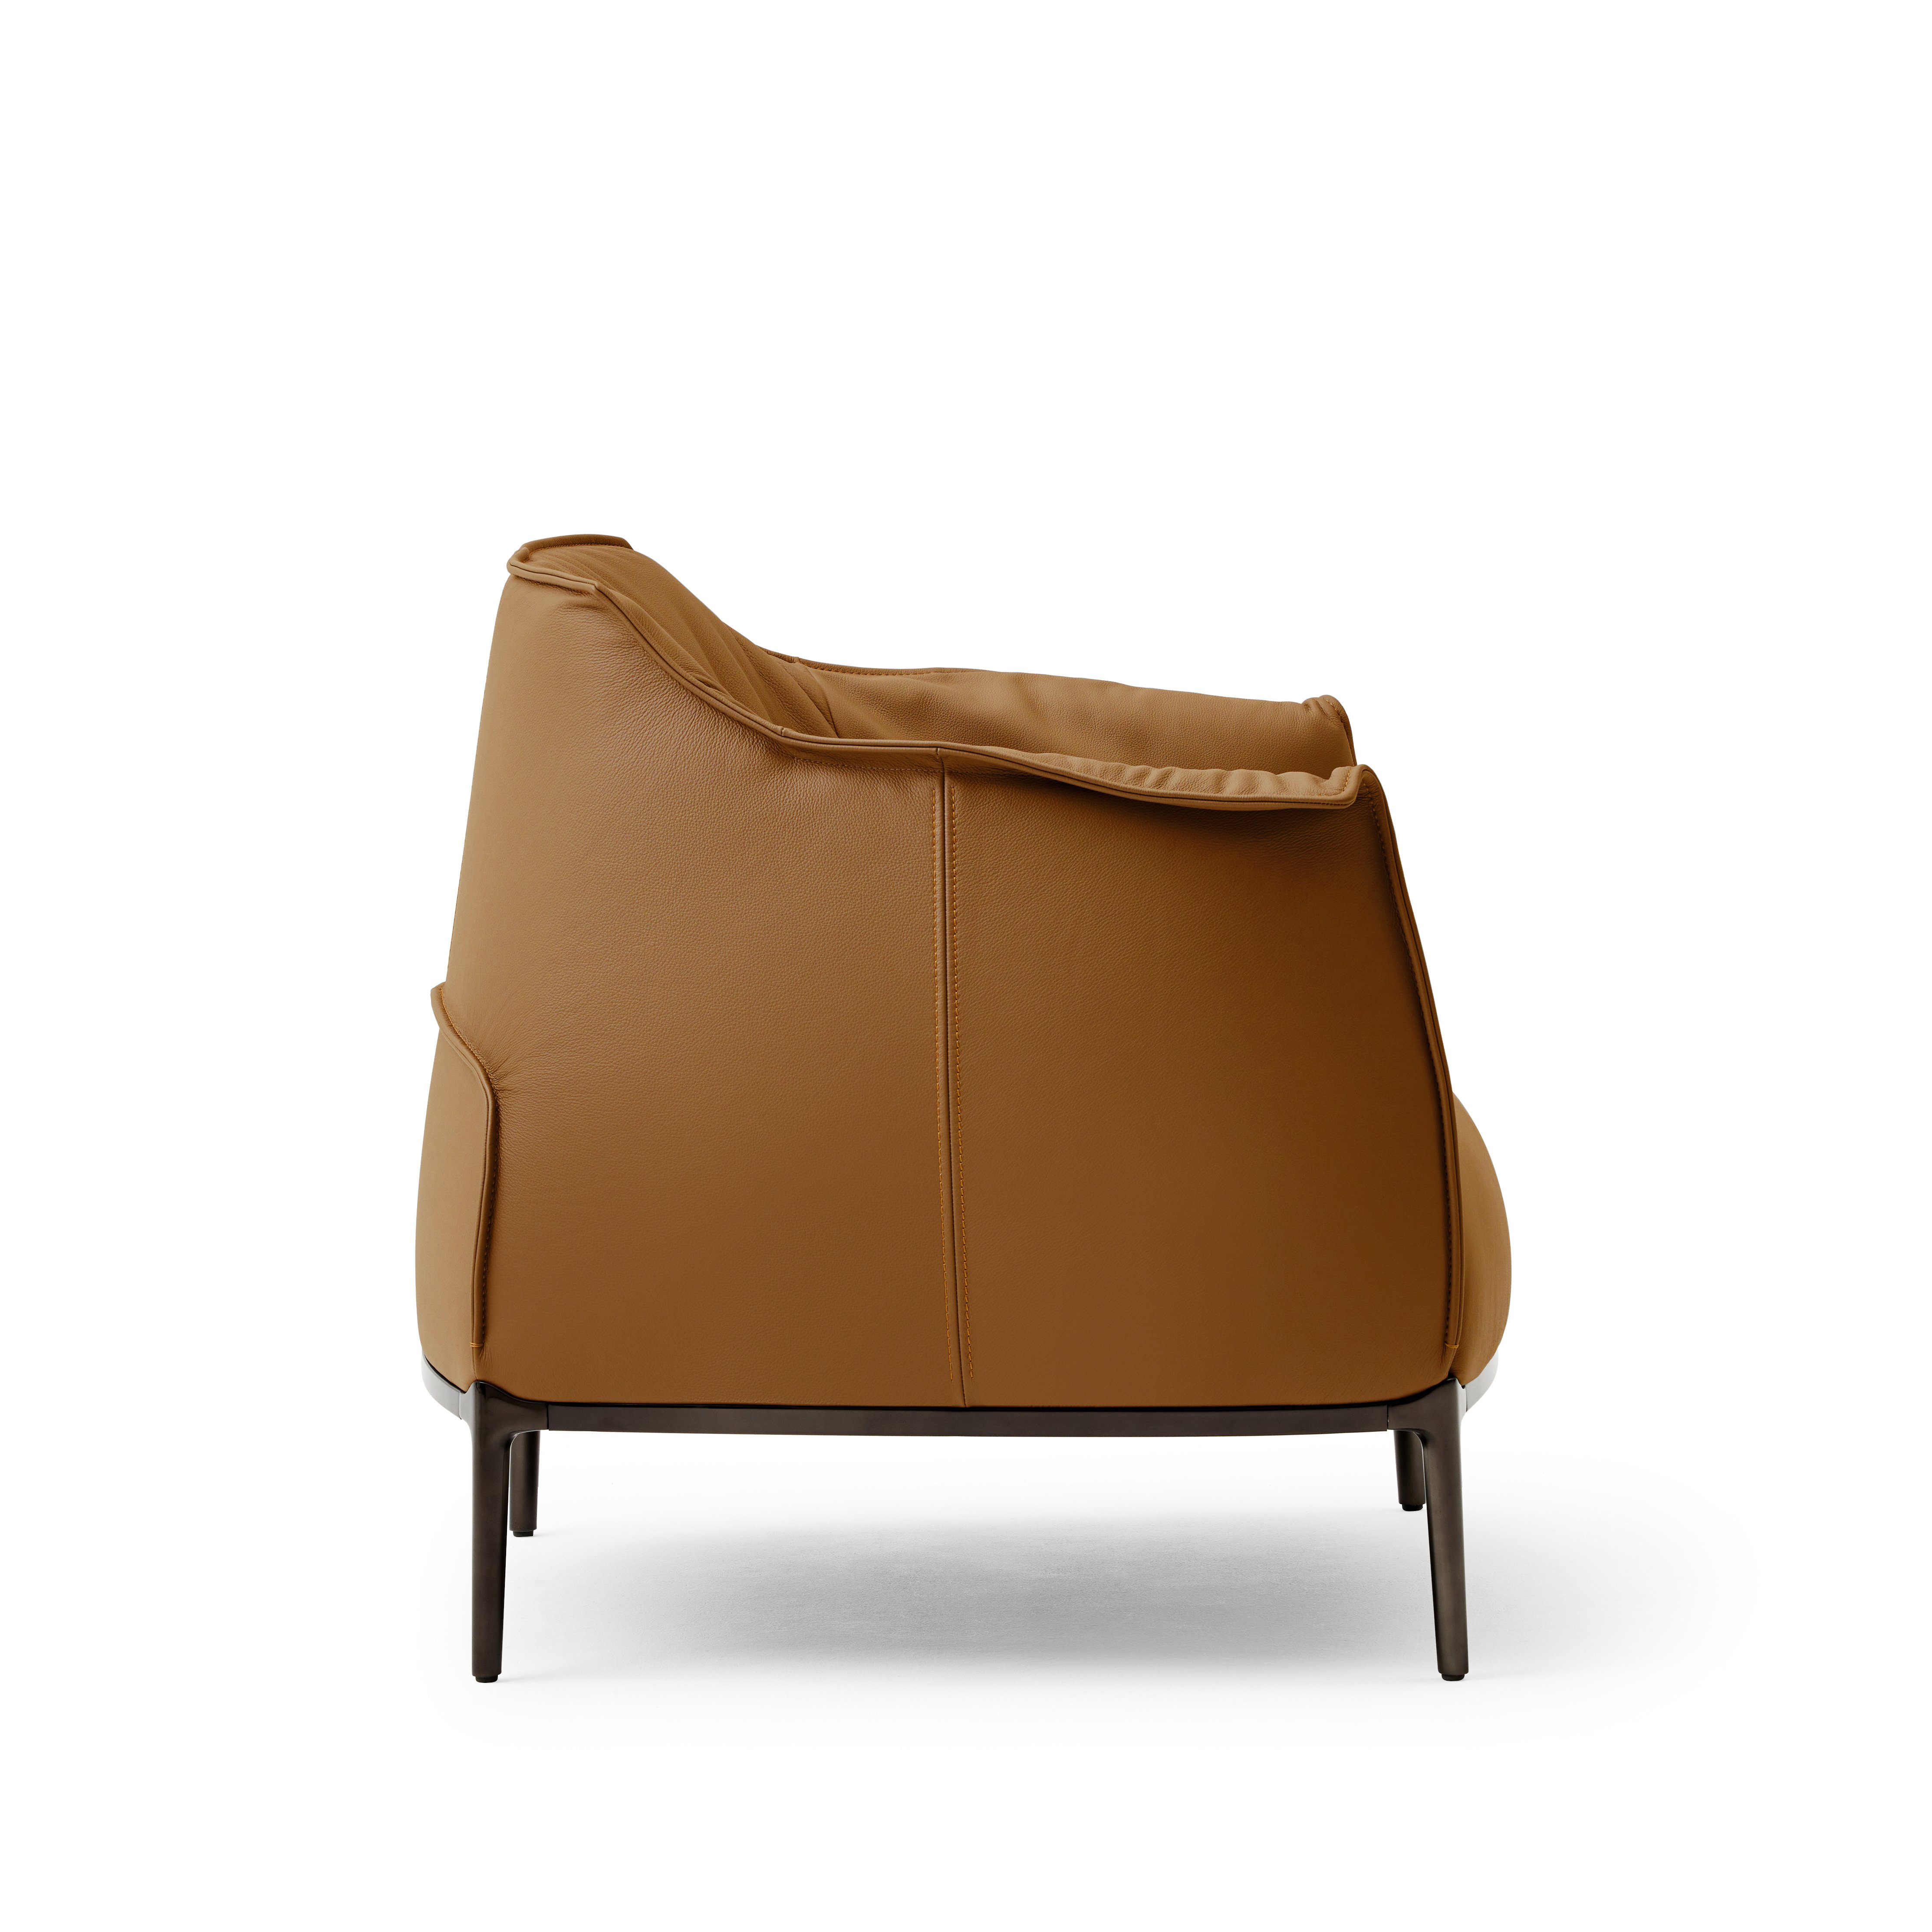 Detail side shot of the Archibald Lounge chair in Brown